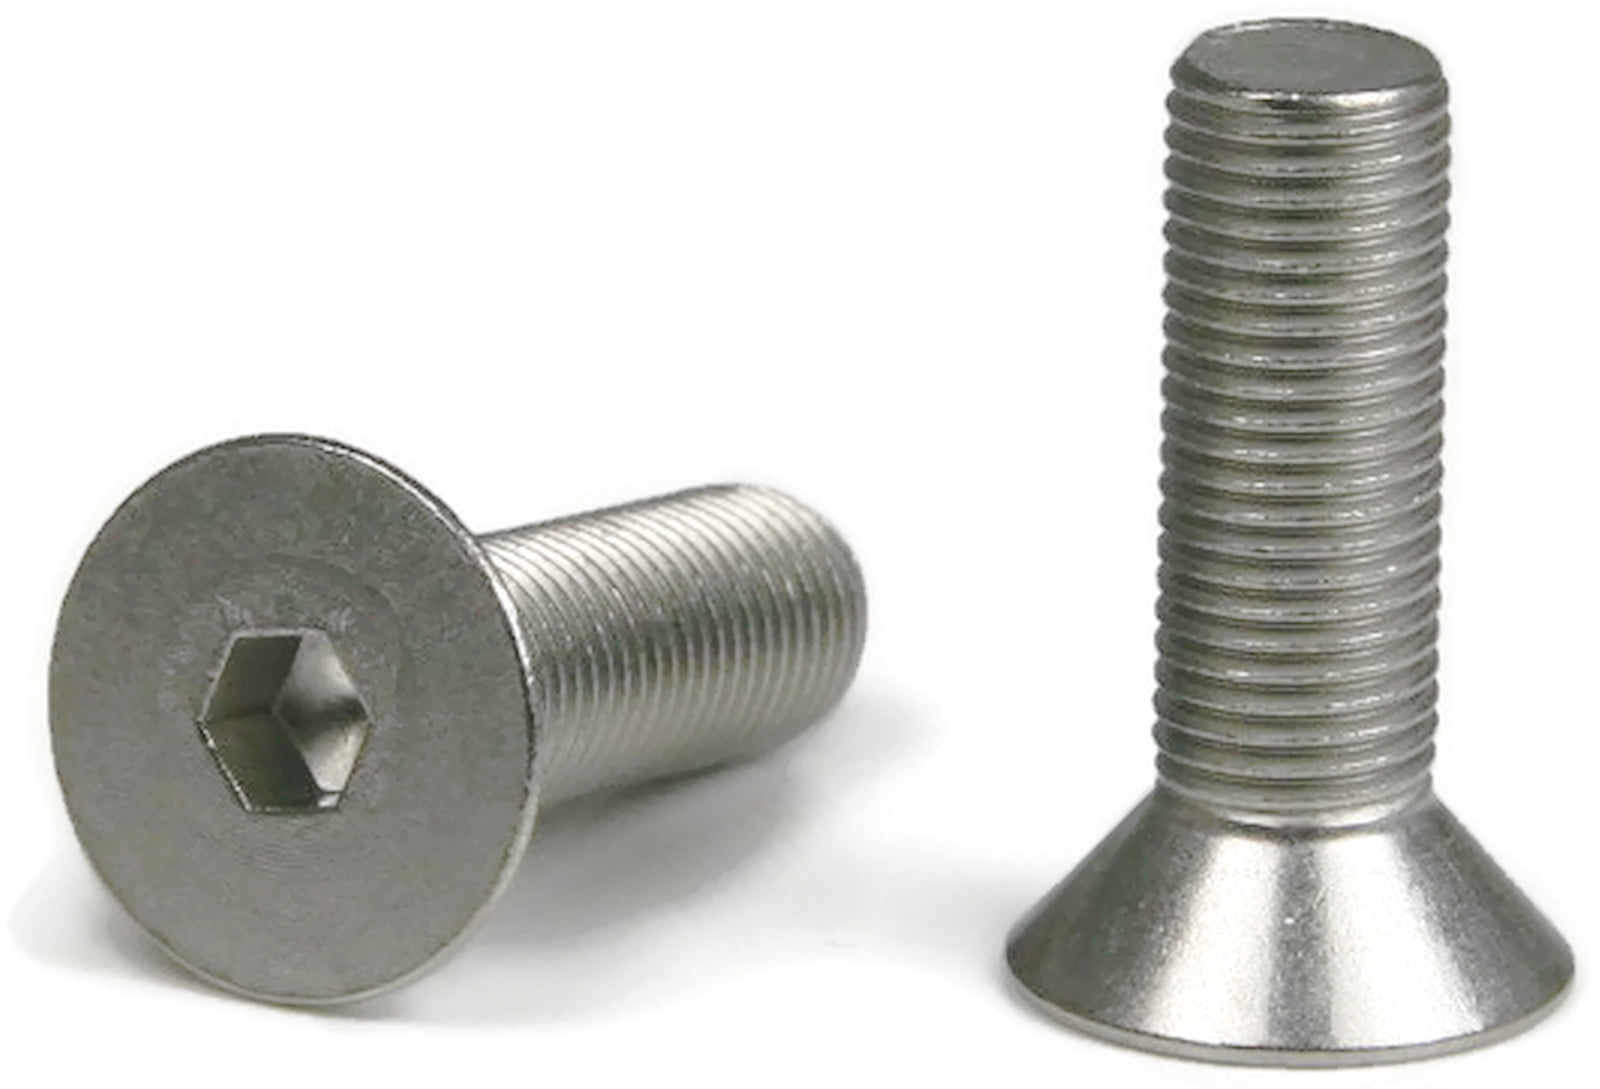 Quantity 25 1/4-20 x 3/8 Button Head Socket Cap Screws 18-8 Stainless Steel Allen Hex Drive By Fastenere Lightning Stainless 